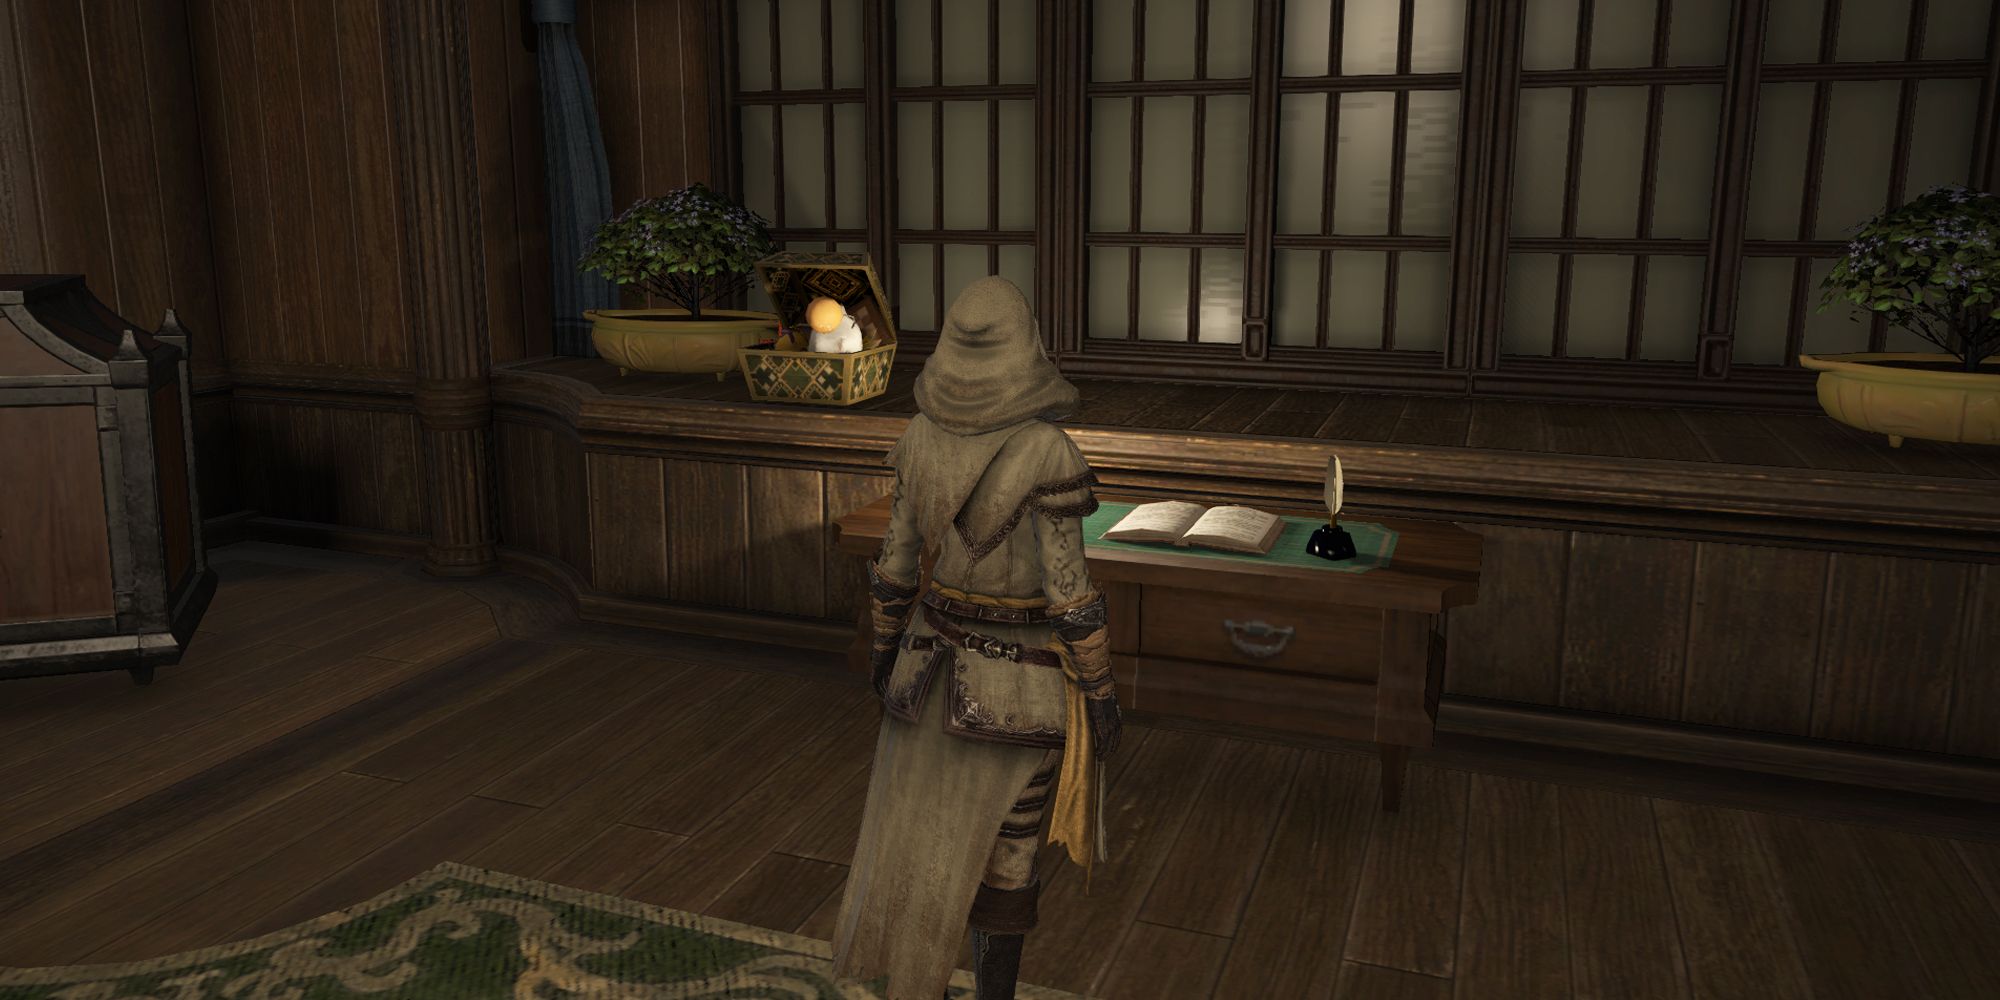 Final Fantasy 14 - A player looking at the unending journey book in an inn room.